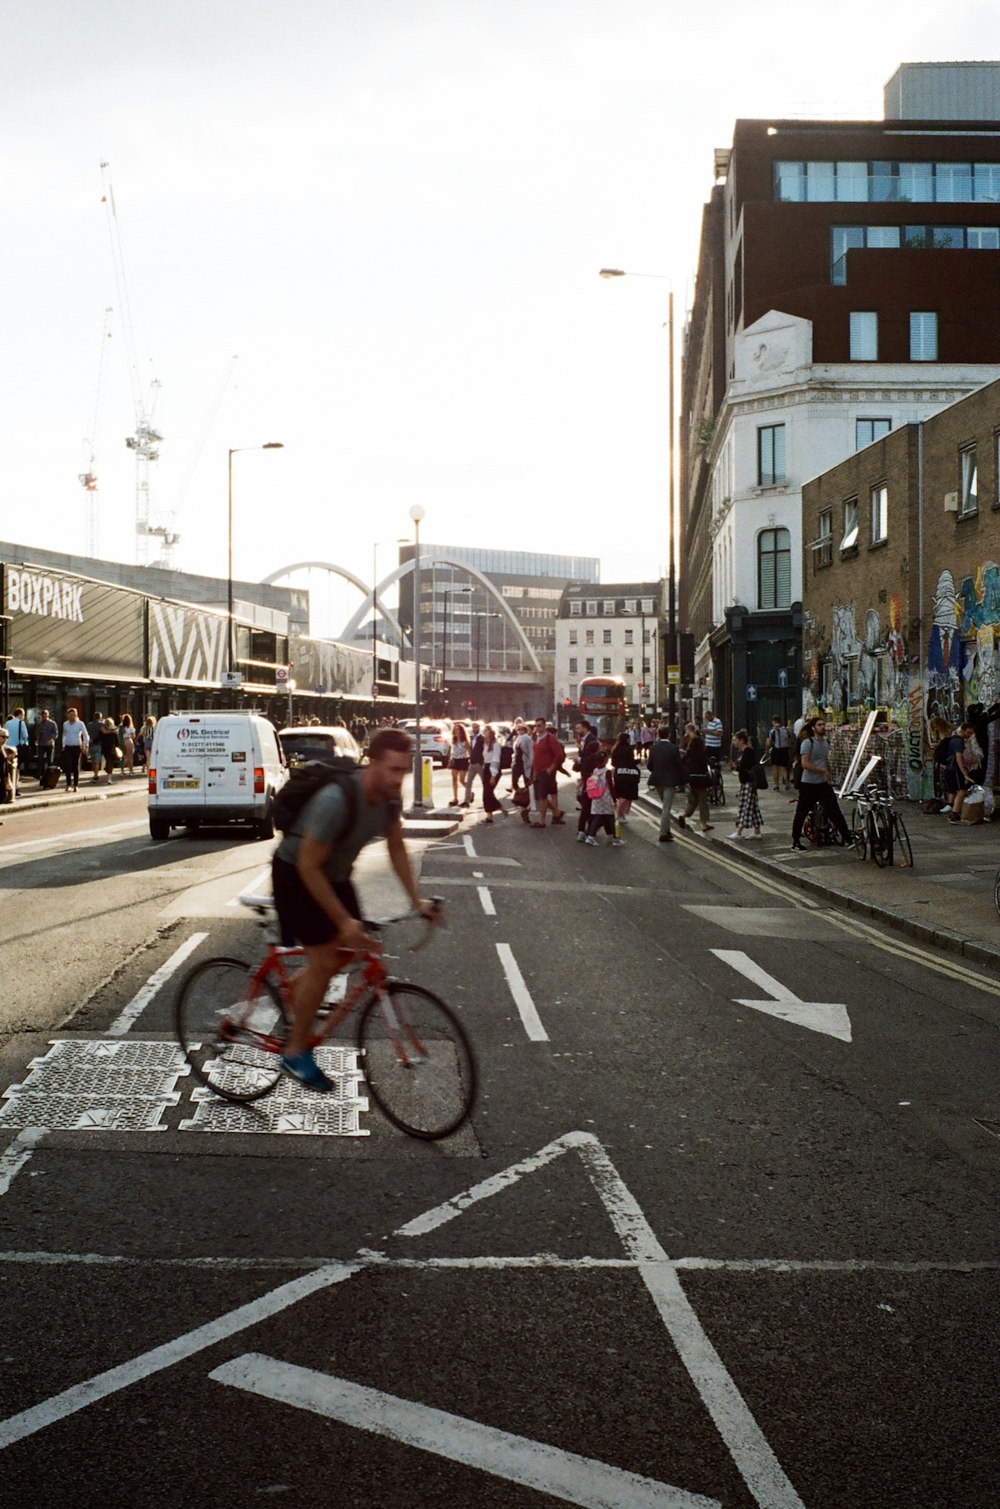 a person riding a bicycle on a street with a crowd of people